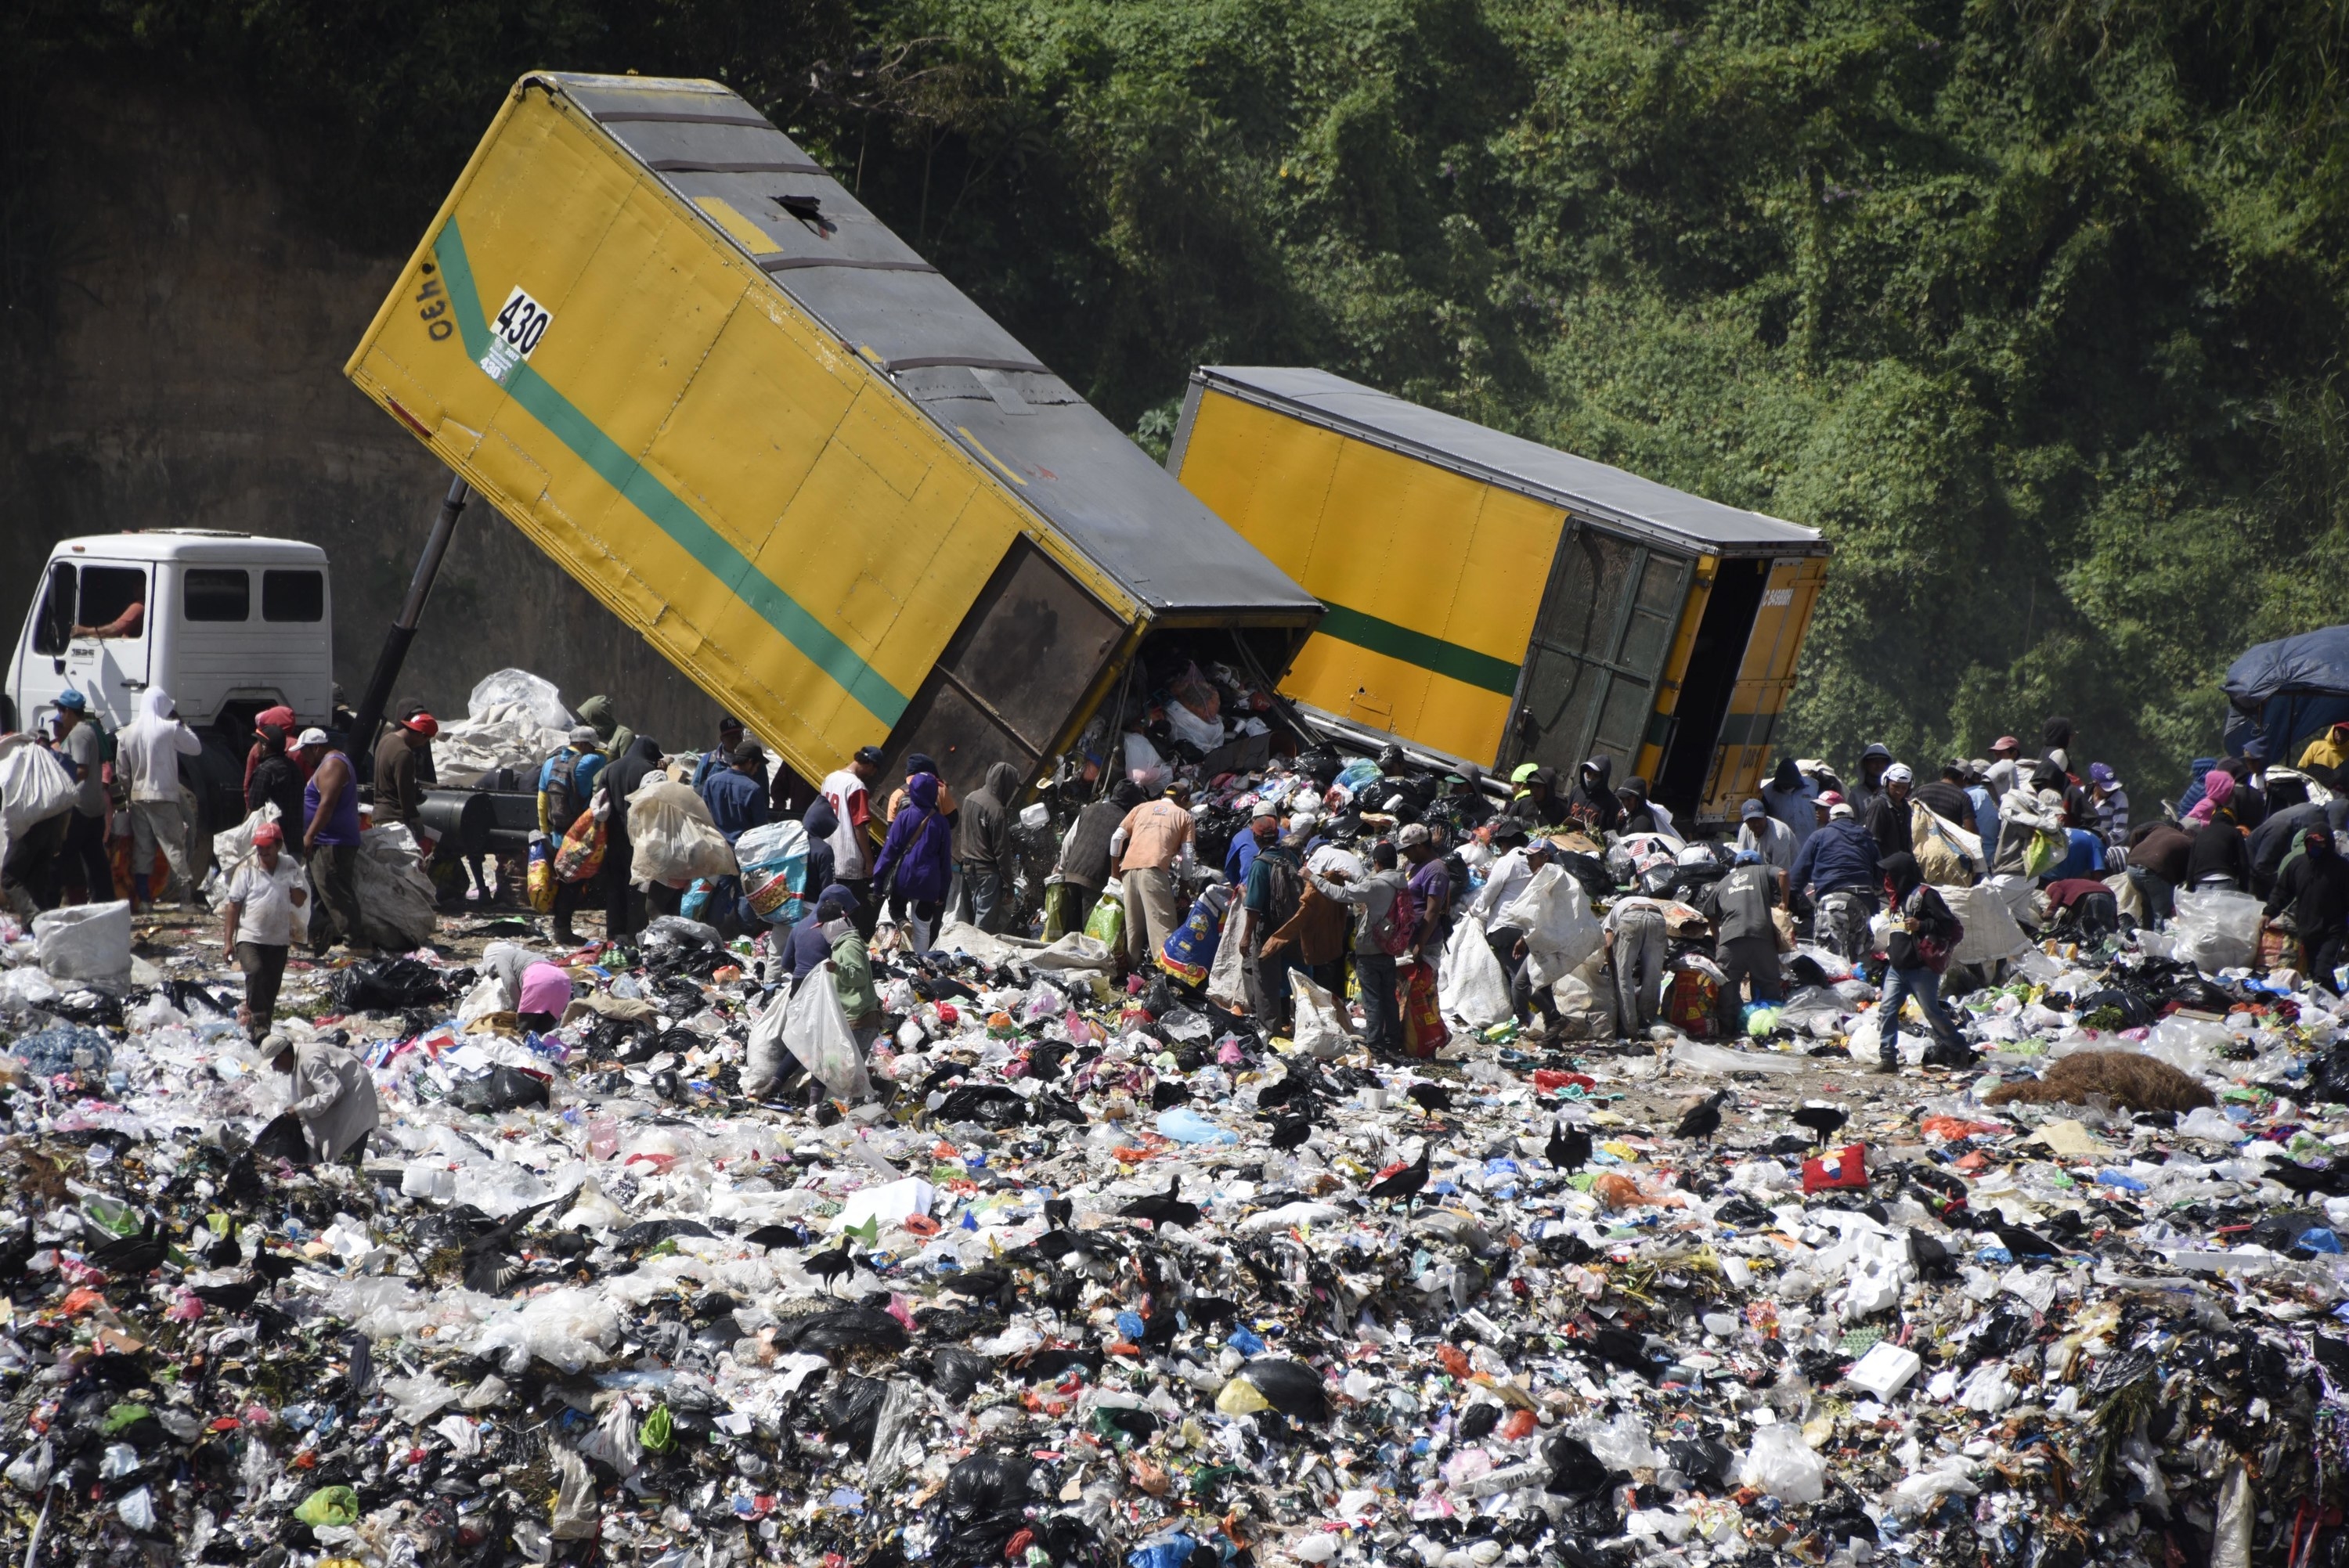 Dozens of people wait as trash trucks empty waste at a landfill in South America